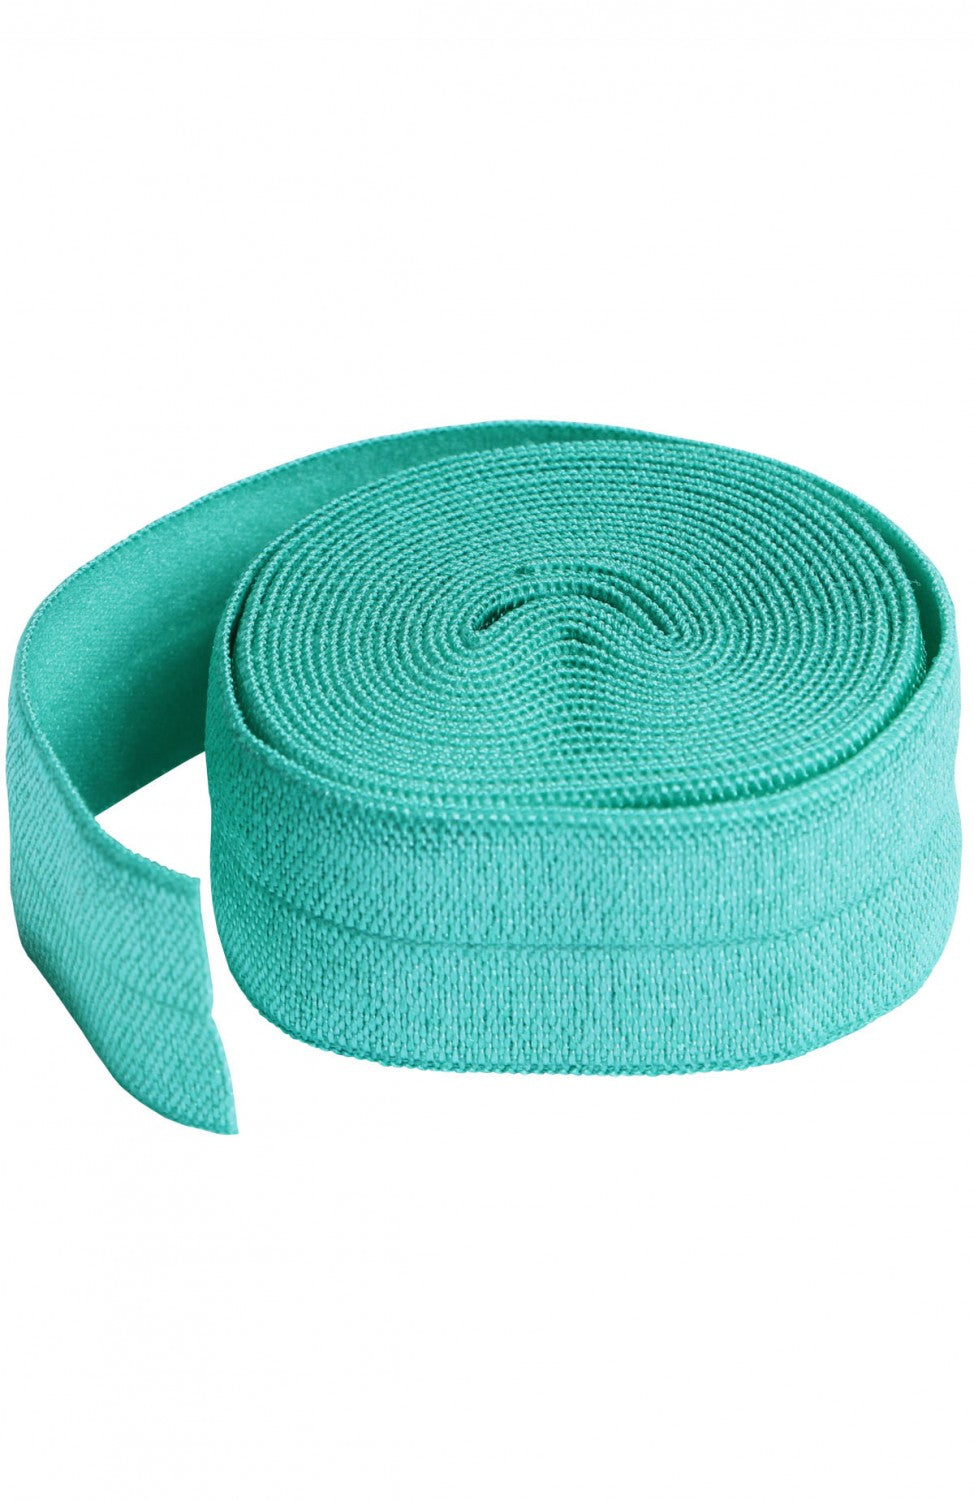 Fold-Over Elastic - Turquoise - 3/4" x 2YD - by Annie